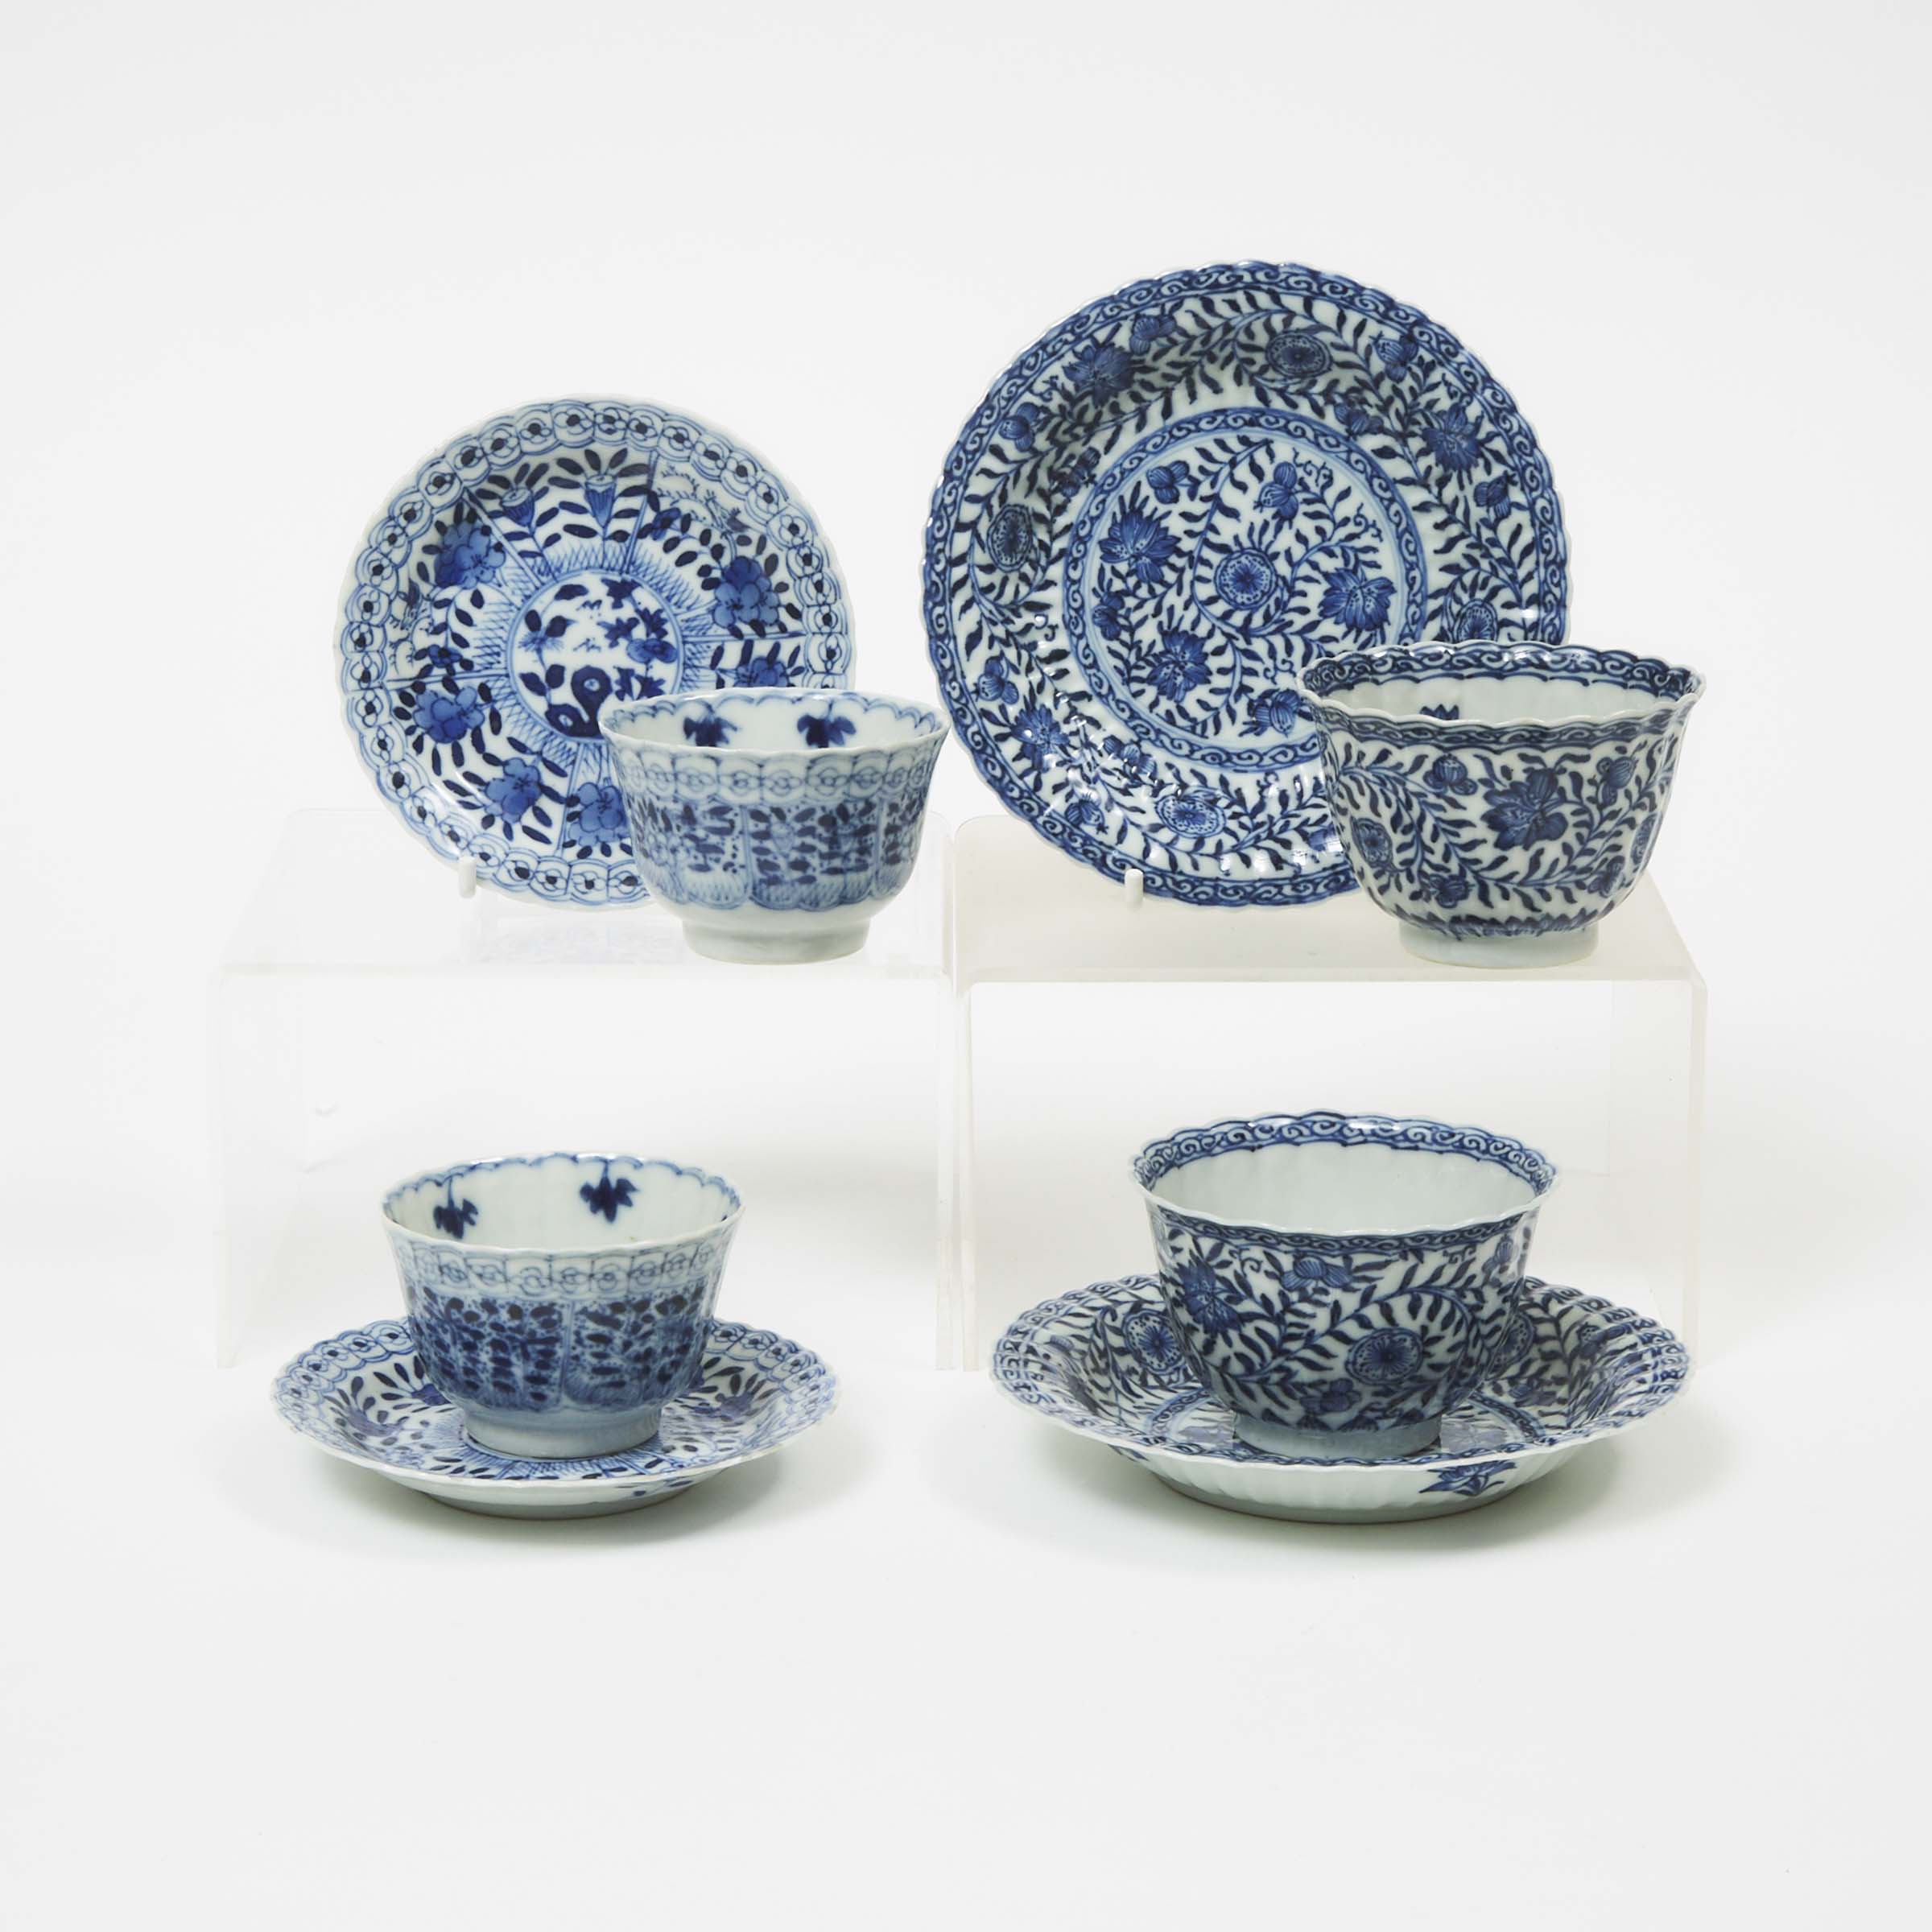 Two Pairs of Blue and White Cups and Saucers, Kangxi Period, 17th/18th Century